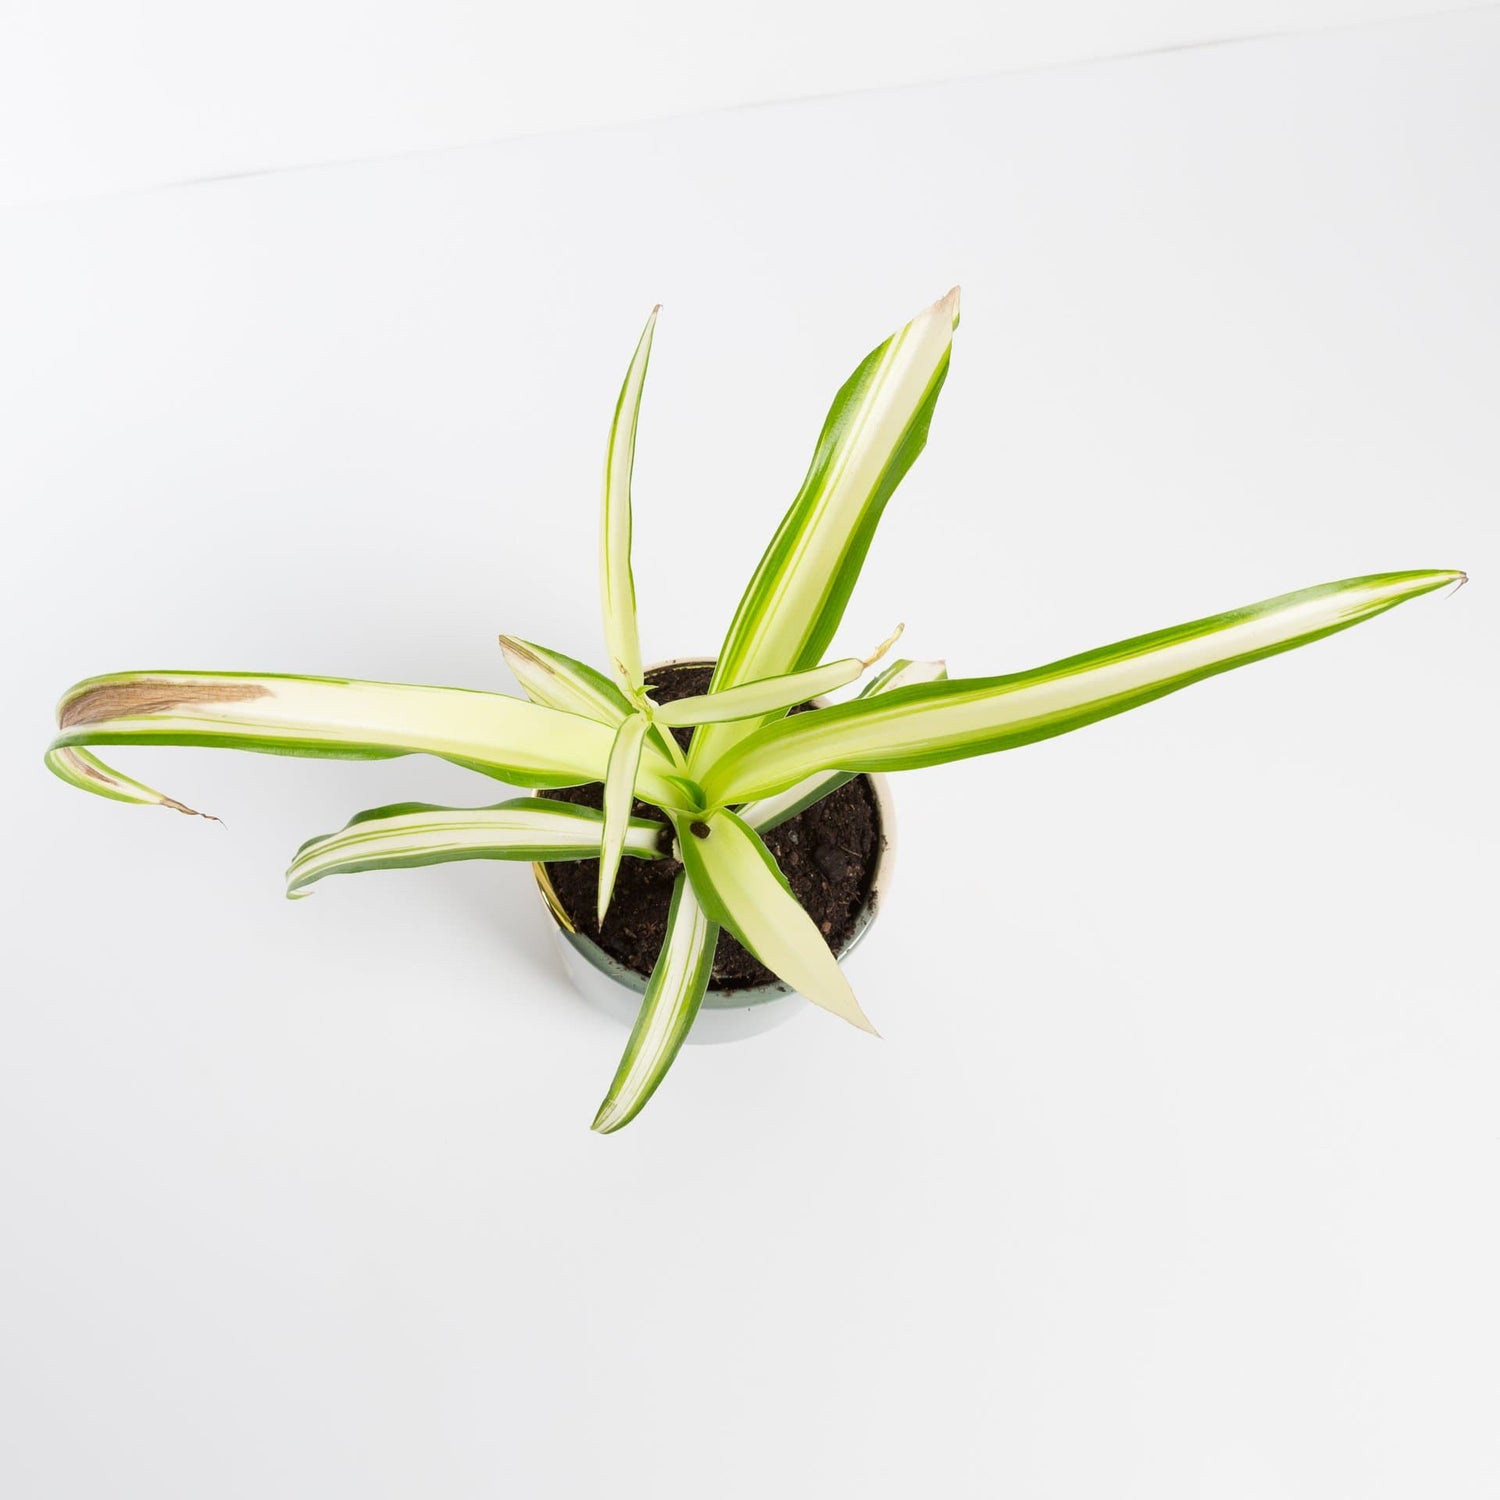 Urban Sprouts Plant Spider Plant 'Curly - Variegated'